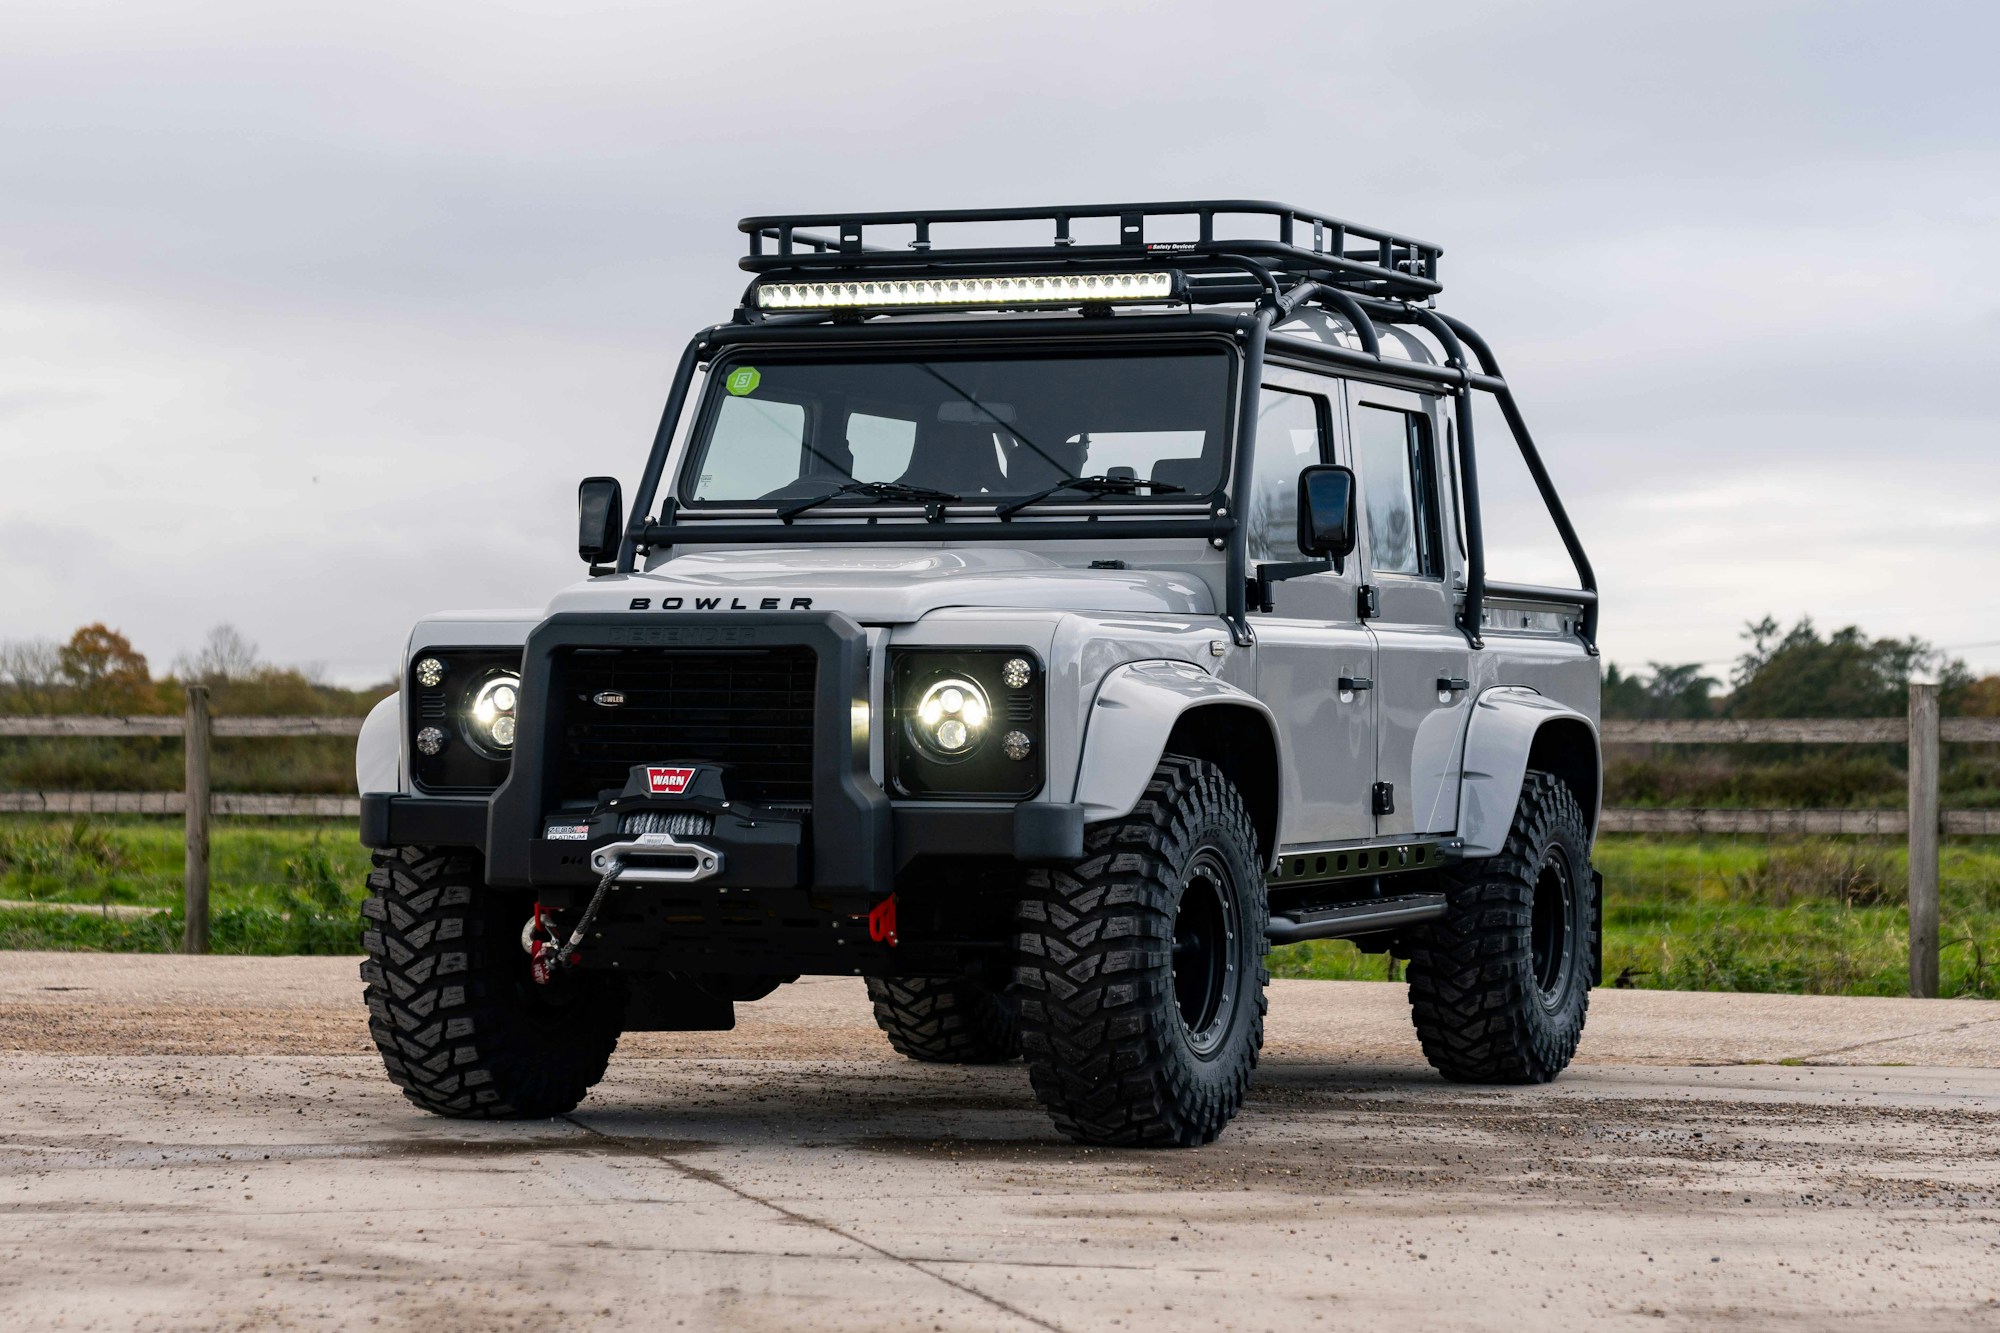 2014 Land Rover Defender 110 DCPU Extreme 'Bowler' for sale by classified  listing privately in Hook, Hampshire, United Kingdom